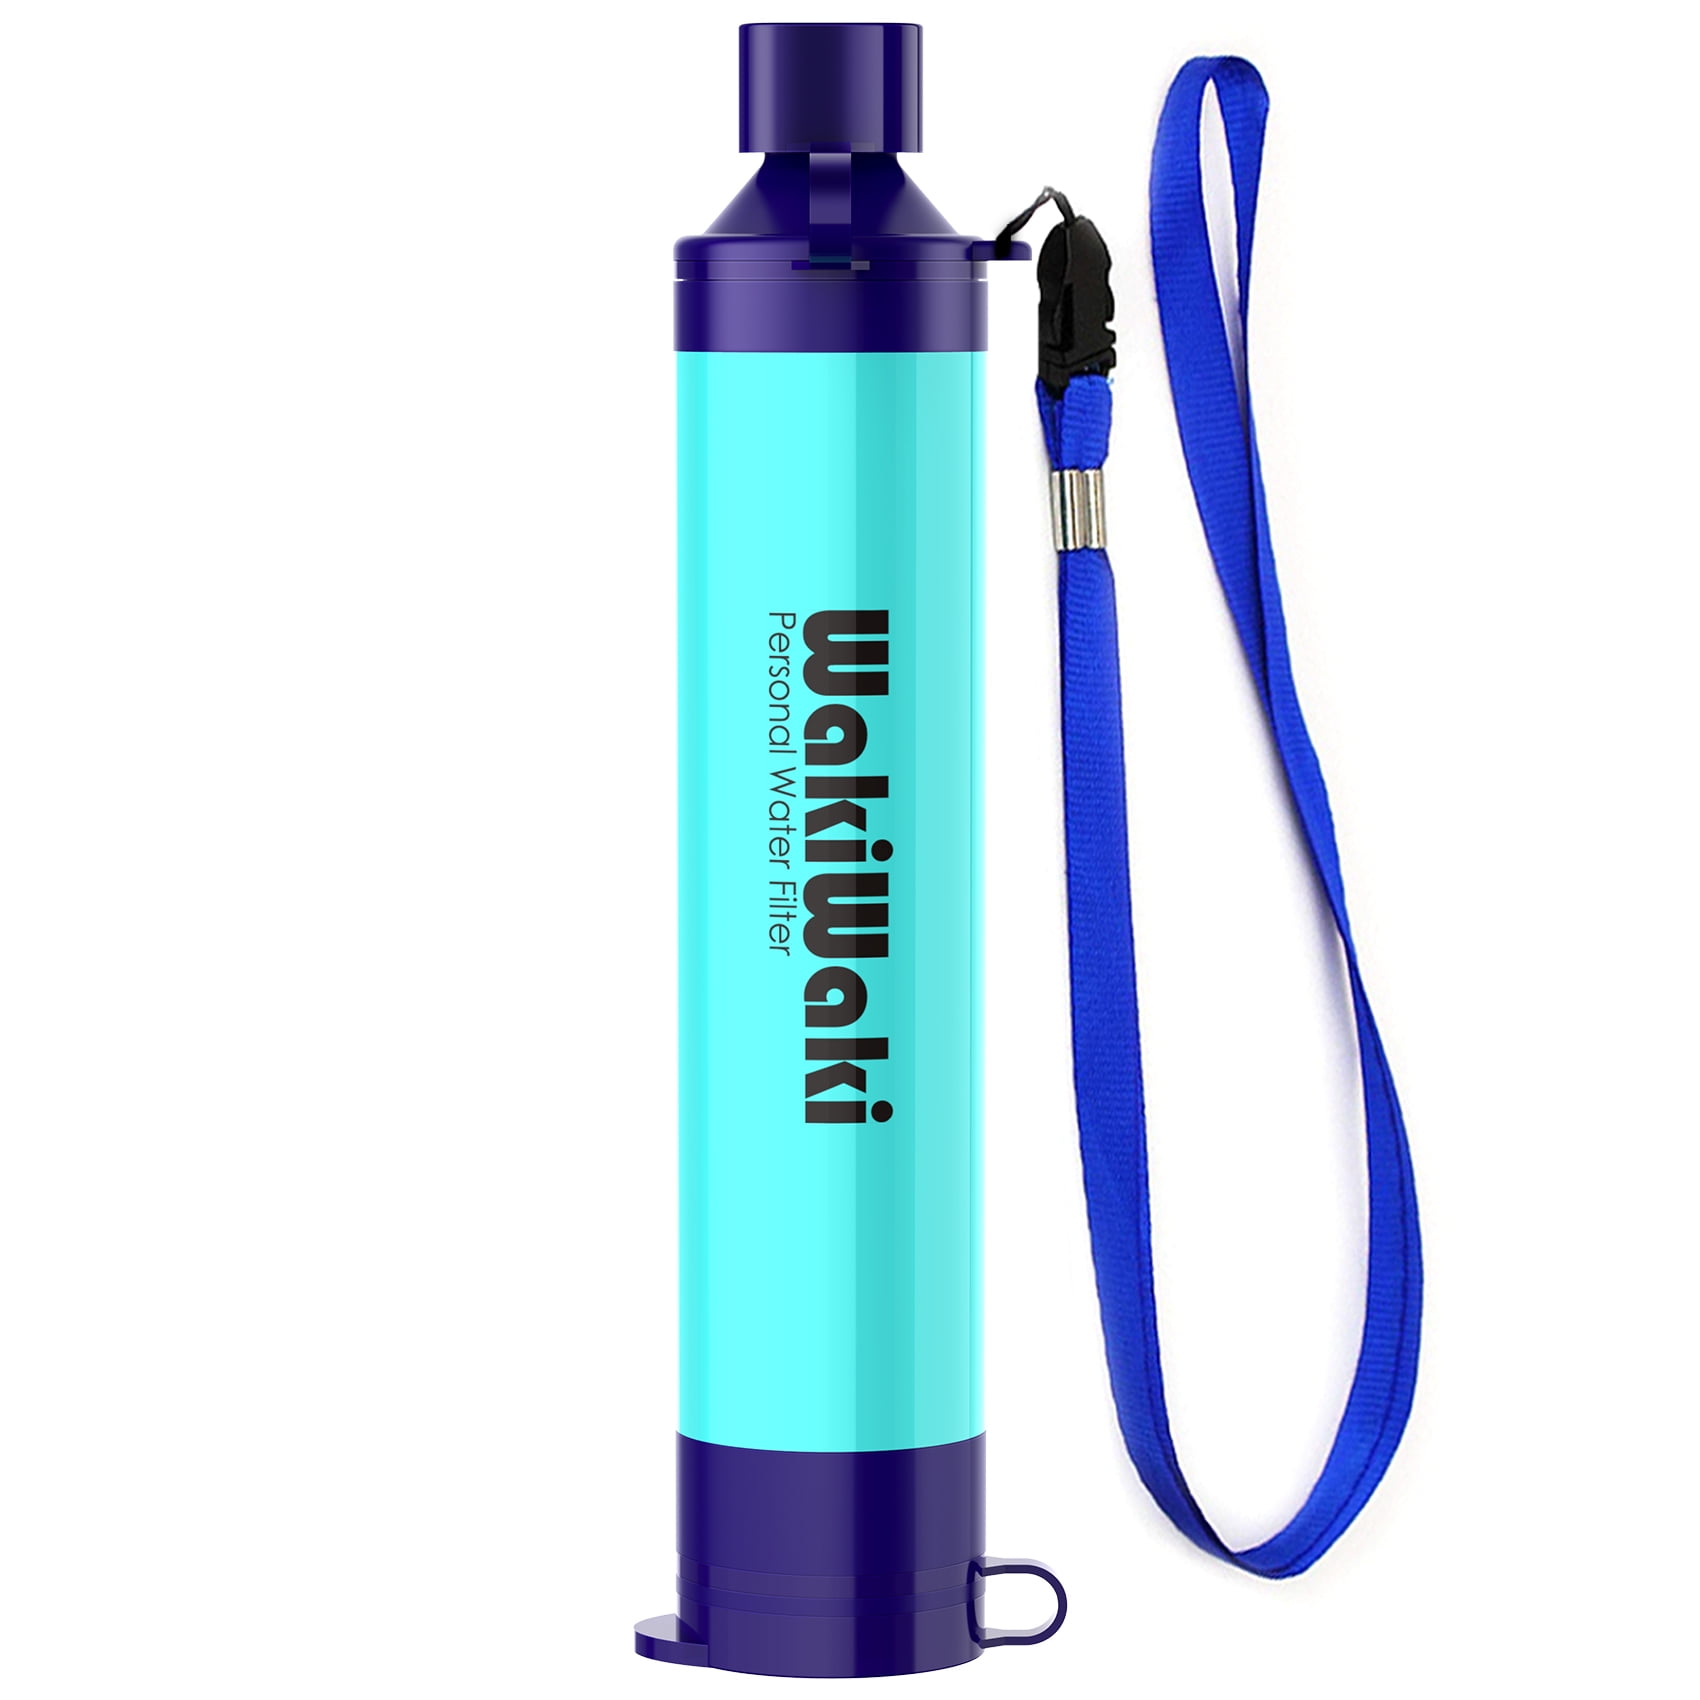 Personal water filter. Clean, safe water.